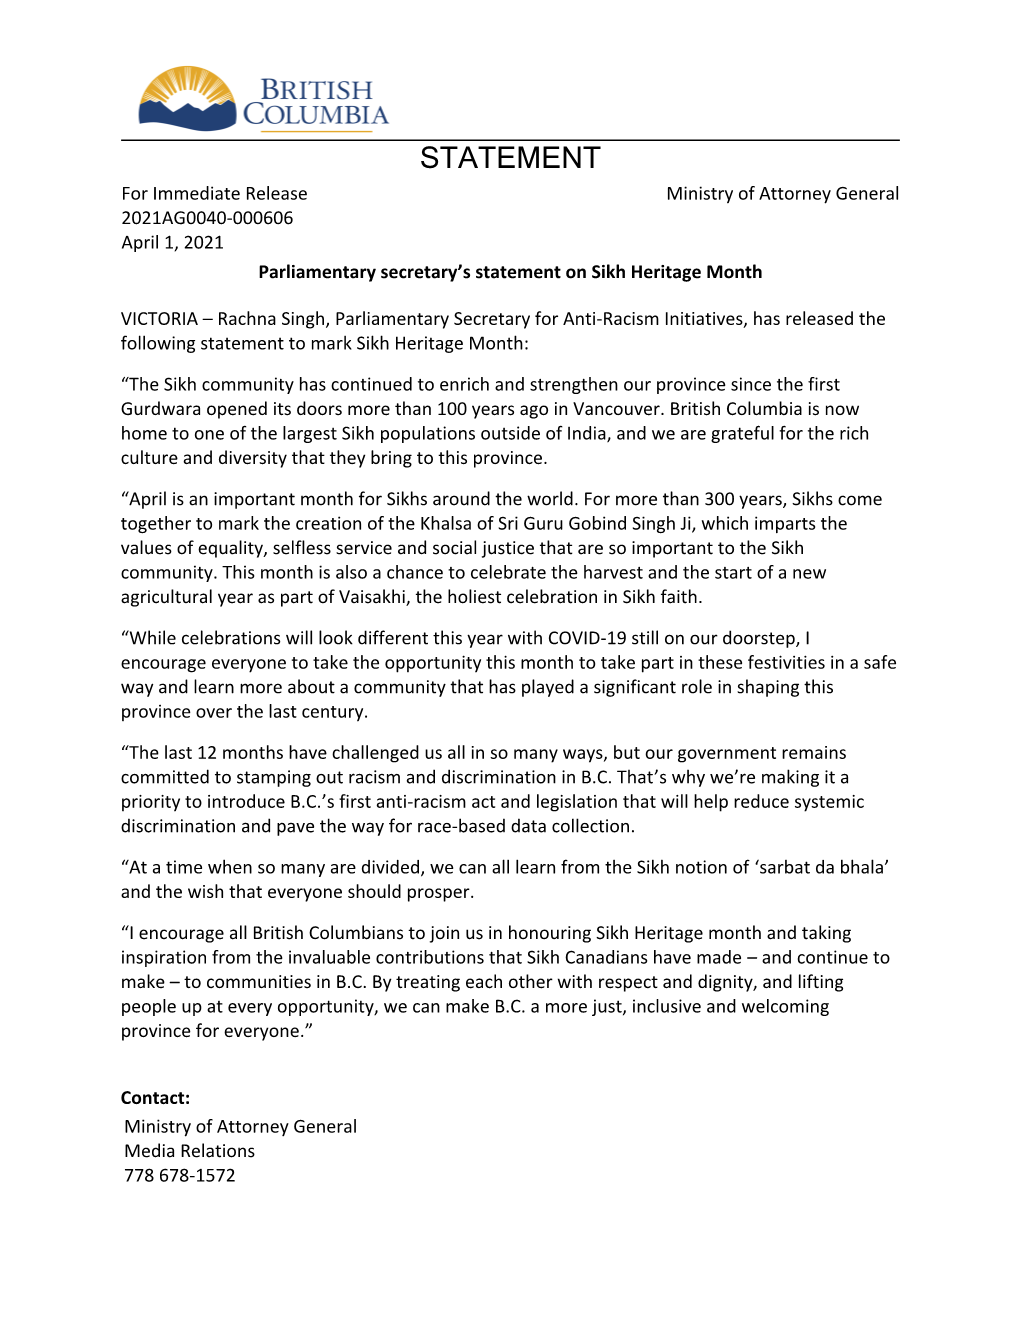 STATEMENT for Immediate Release Ministry of Attorney General 2021AG0040-000606 April 1, 2021 Parliamentary Secretary͛s Statement on Sikh Heritage Month